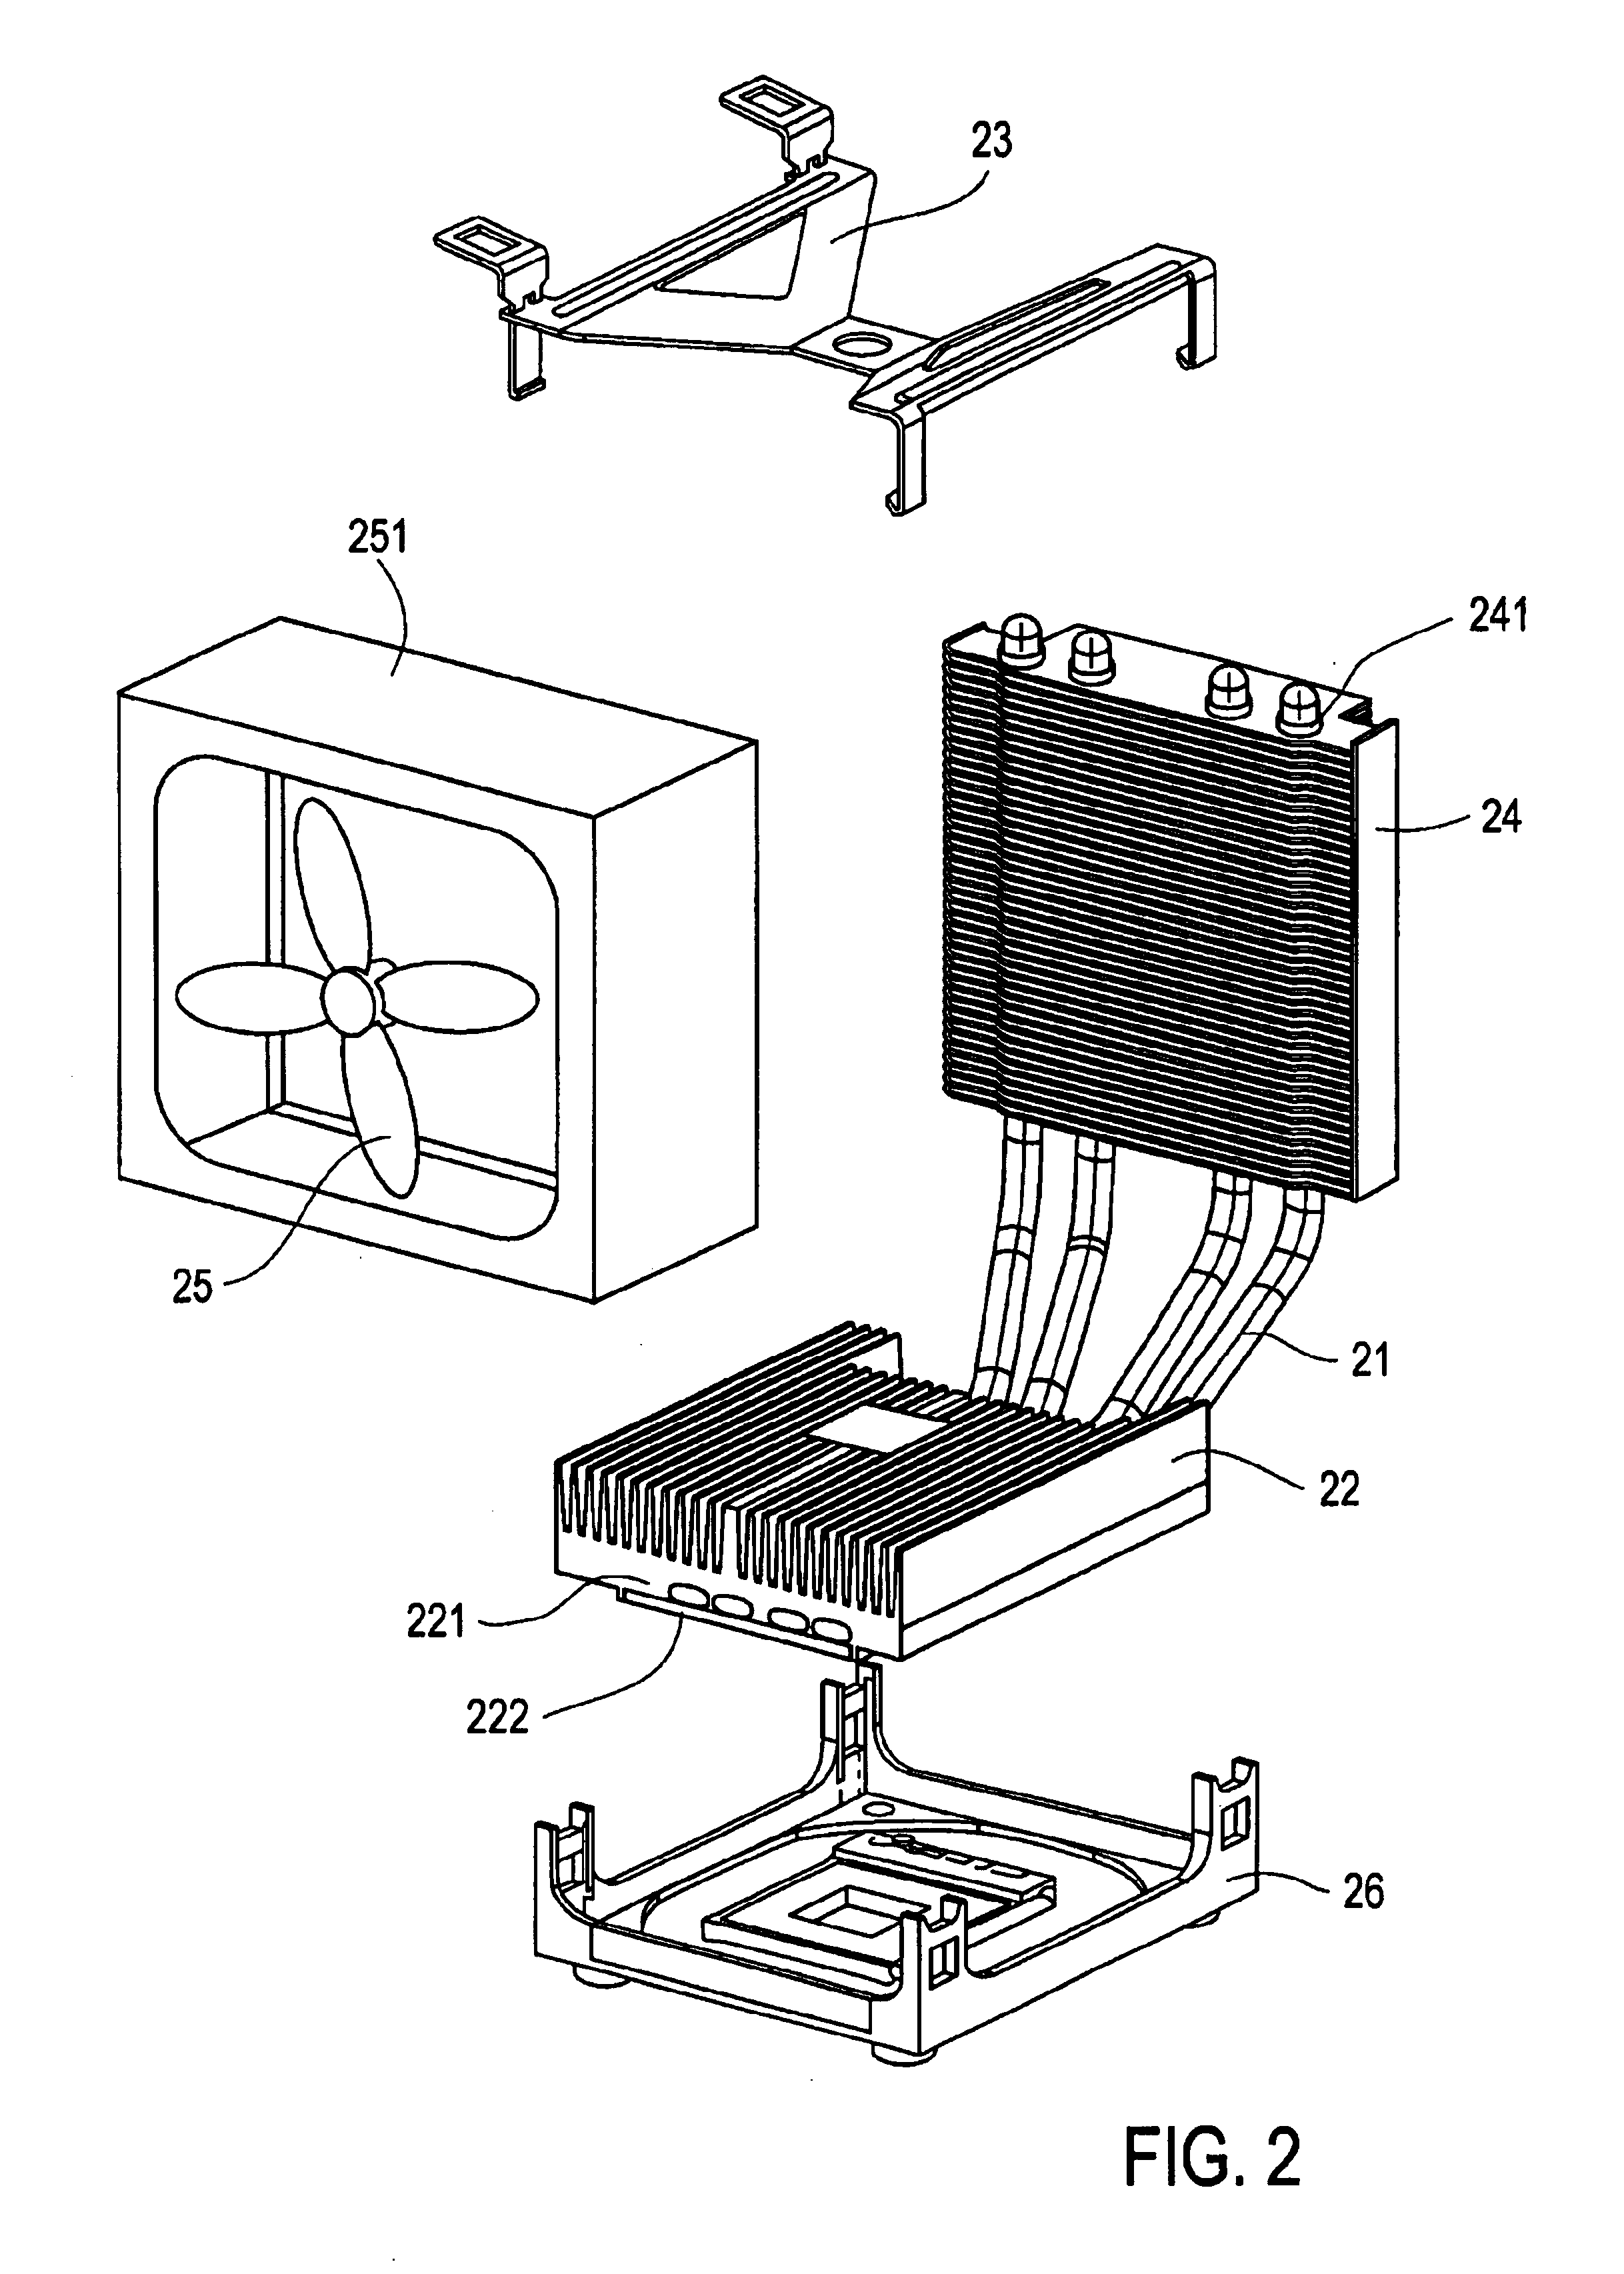 CPU cooling using a heat pipe assembly